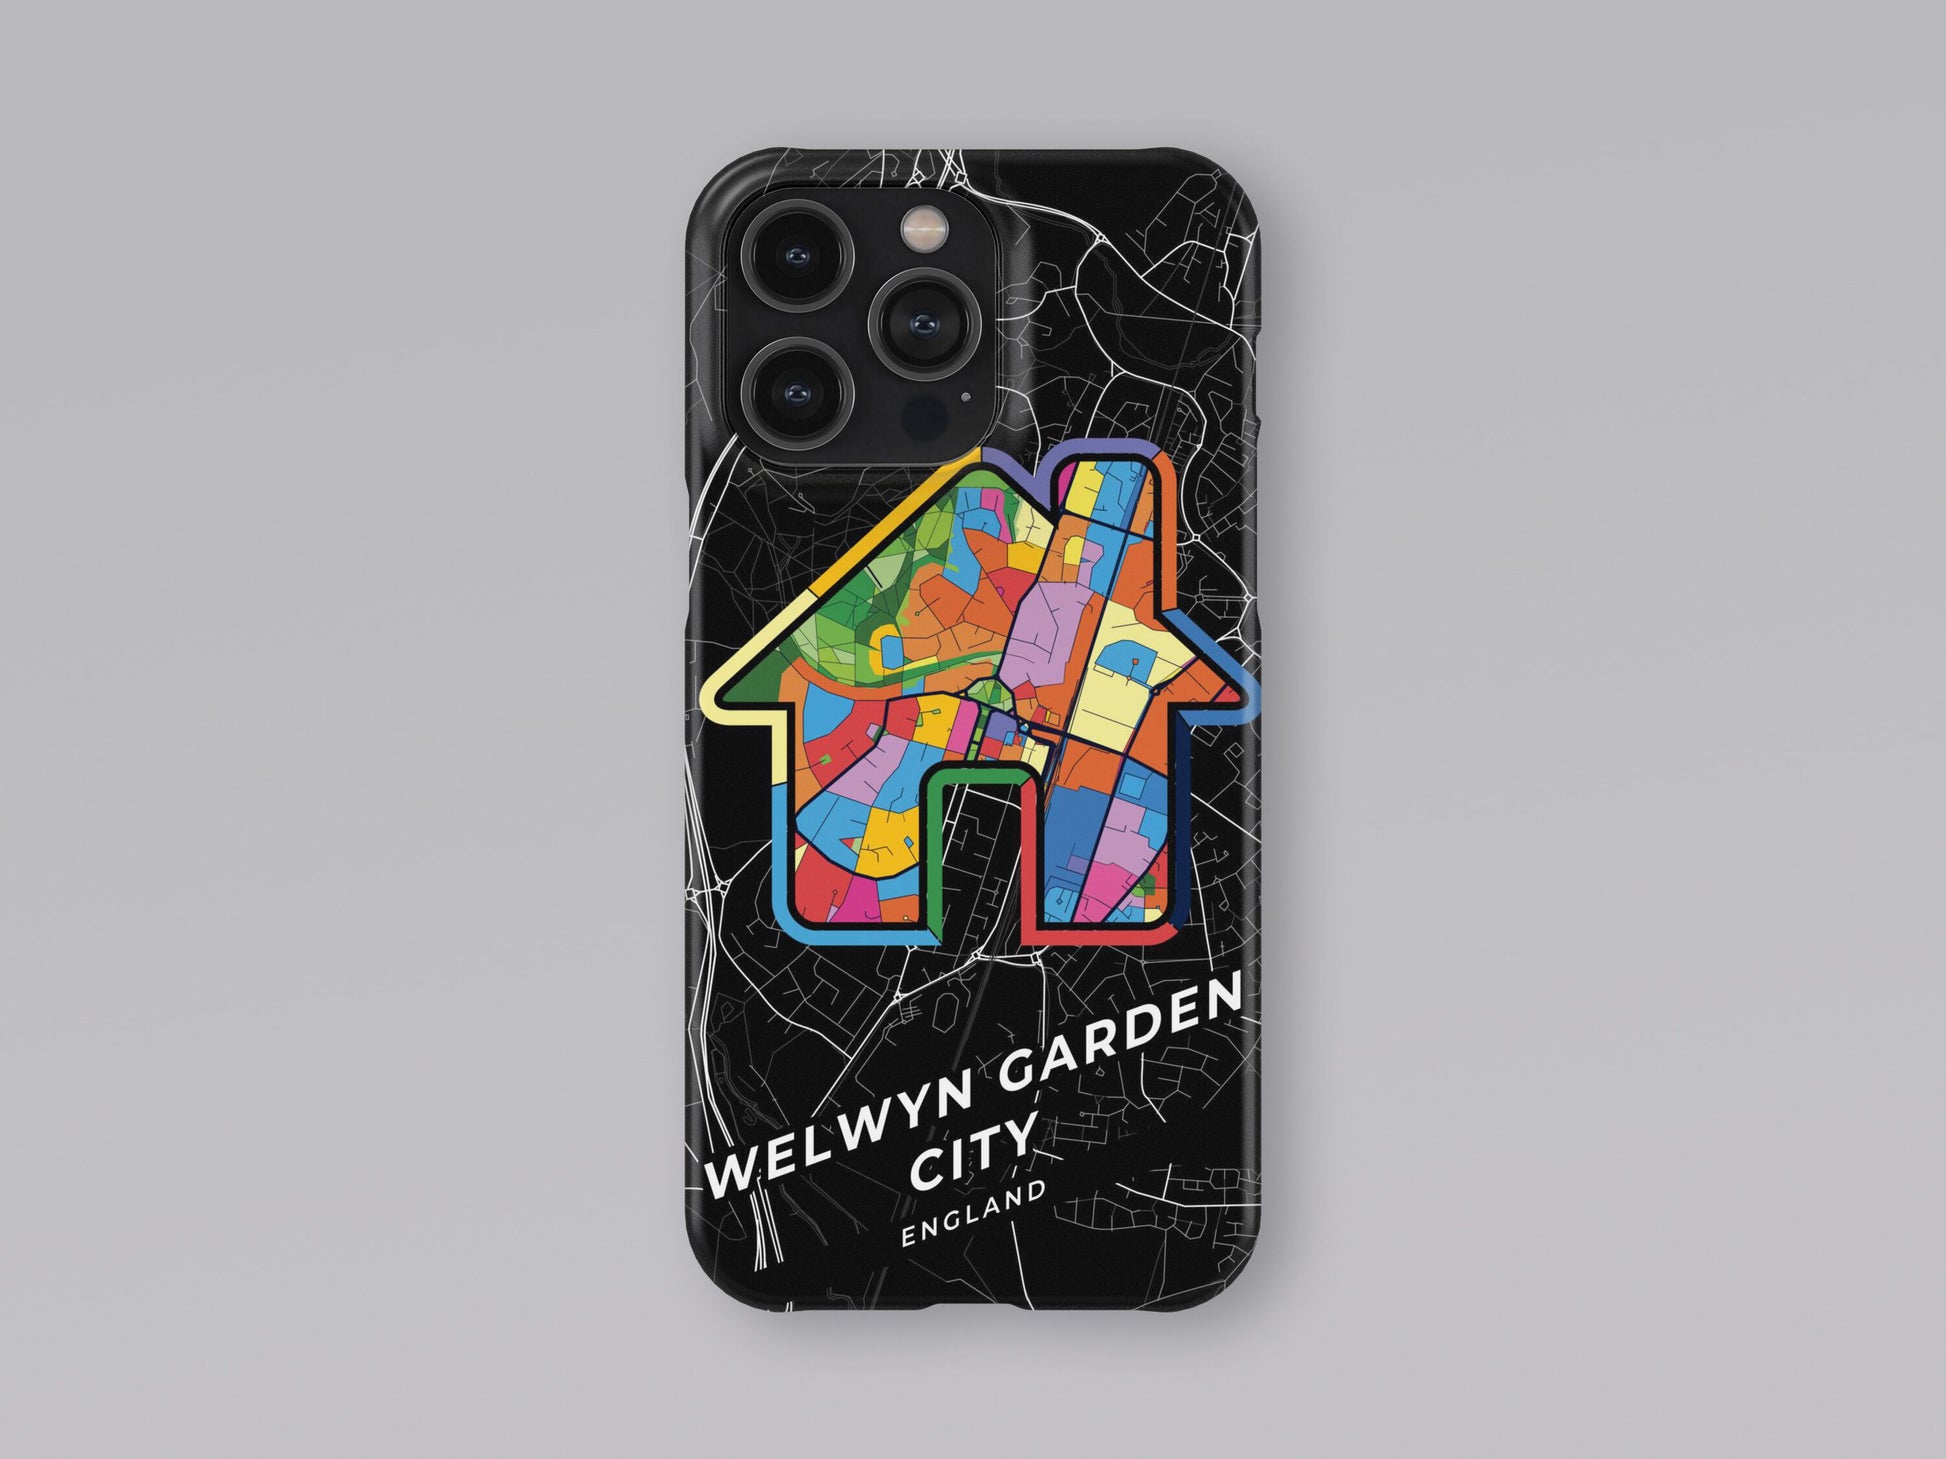 Welwyn Garden City England slim phone case with colorful icon 3